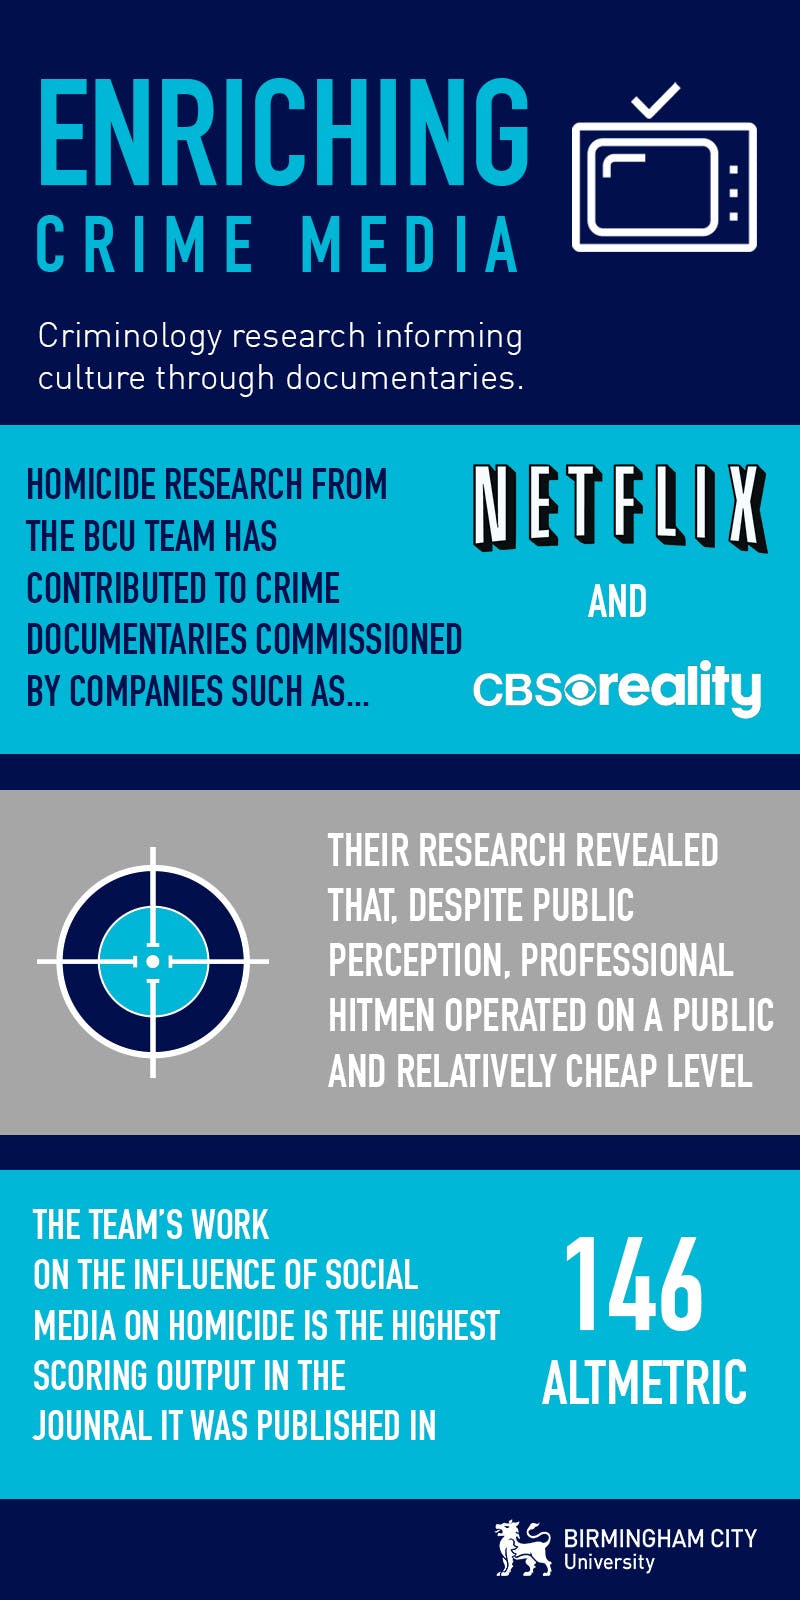 Information on how BCU's research into homicide has improved representation in the media.